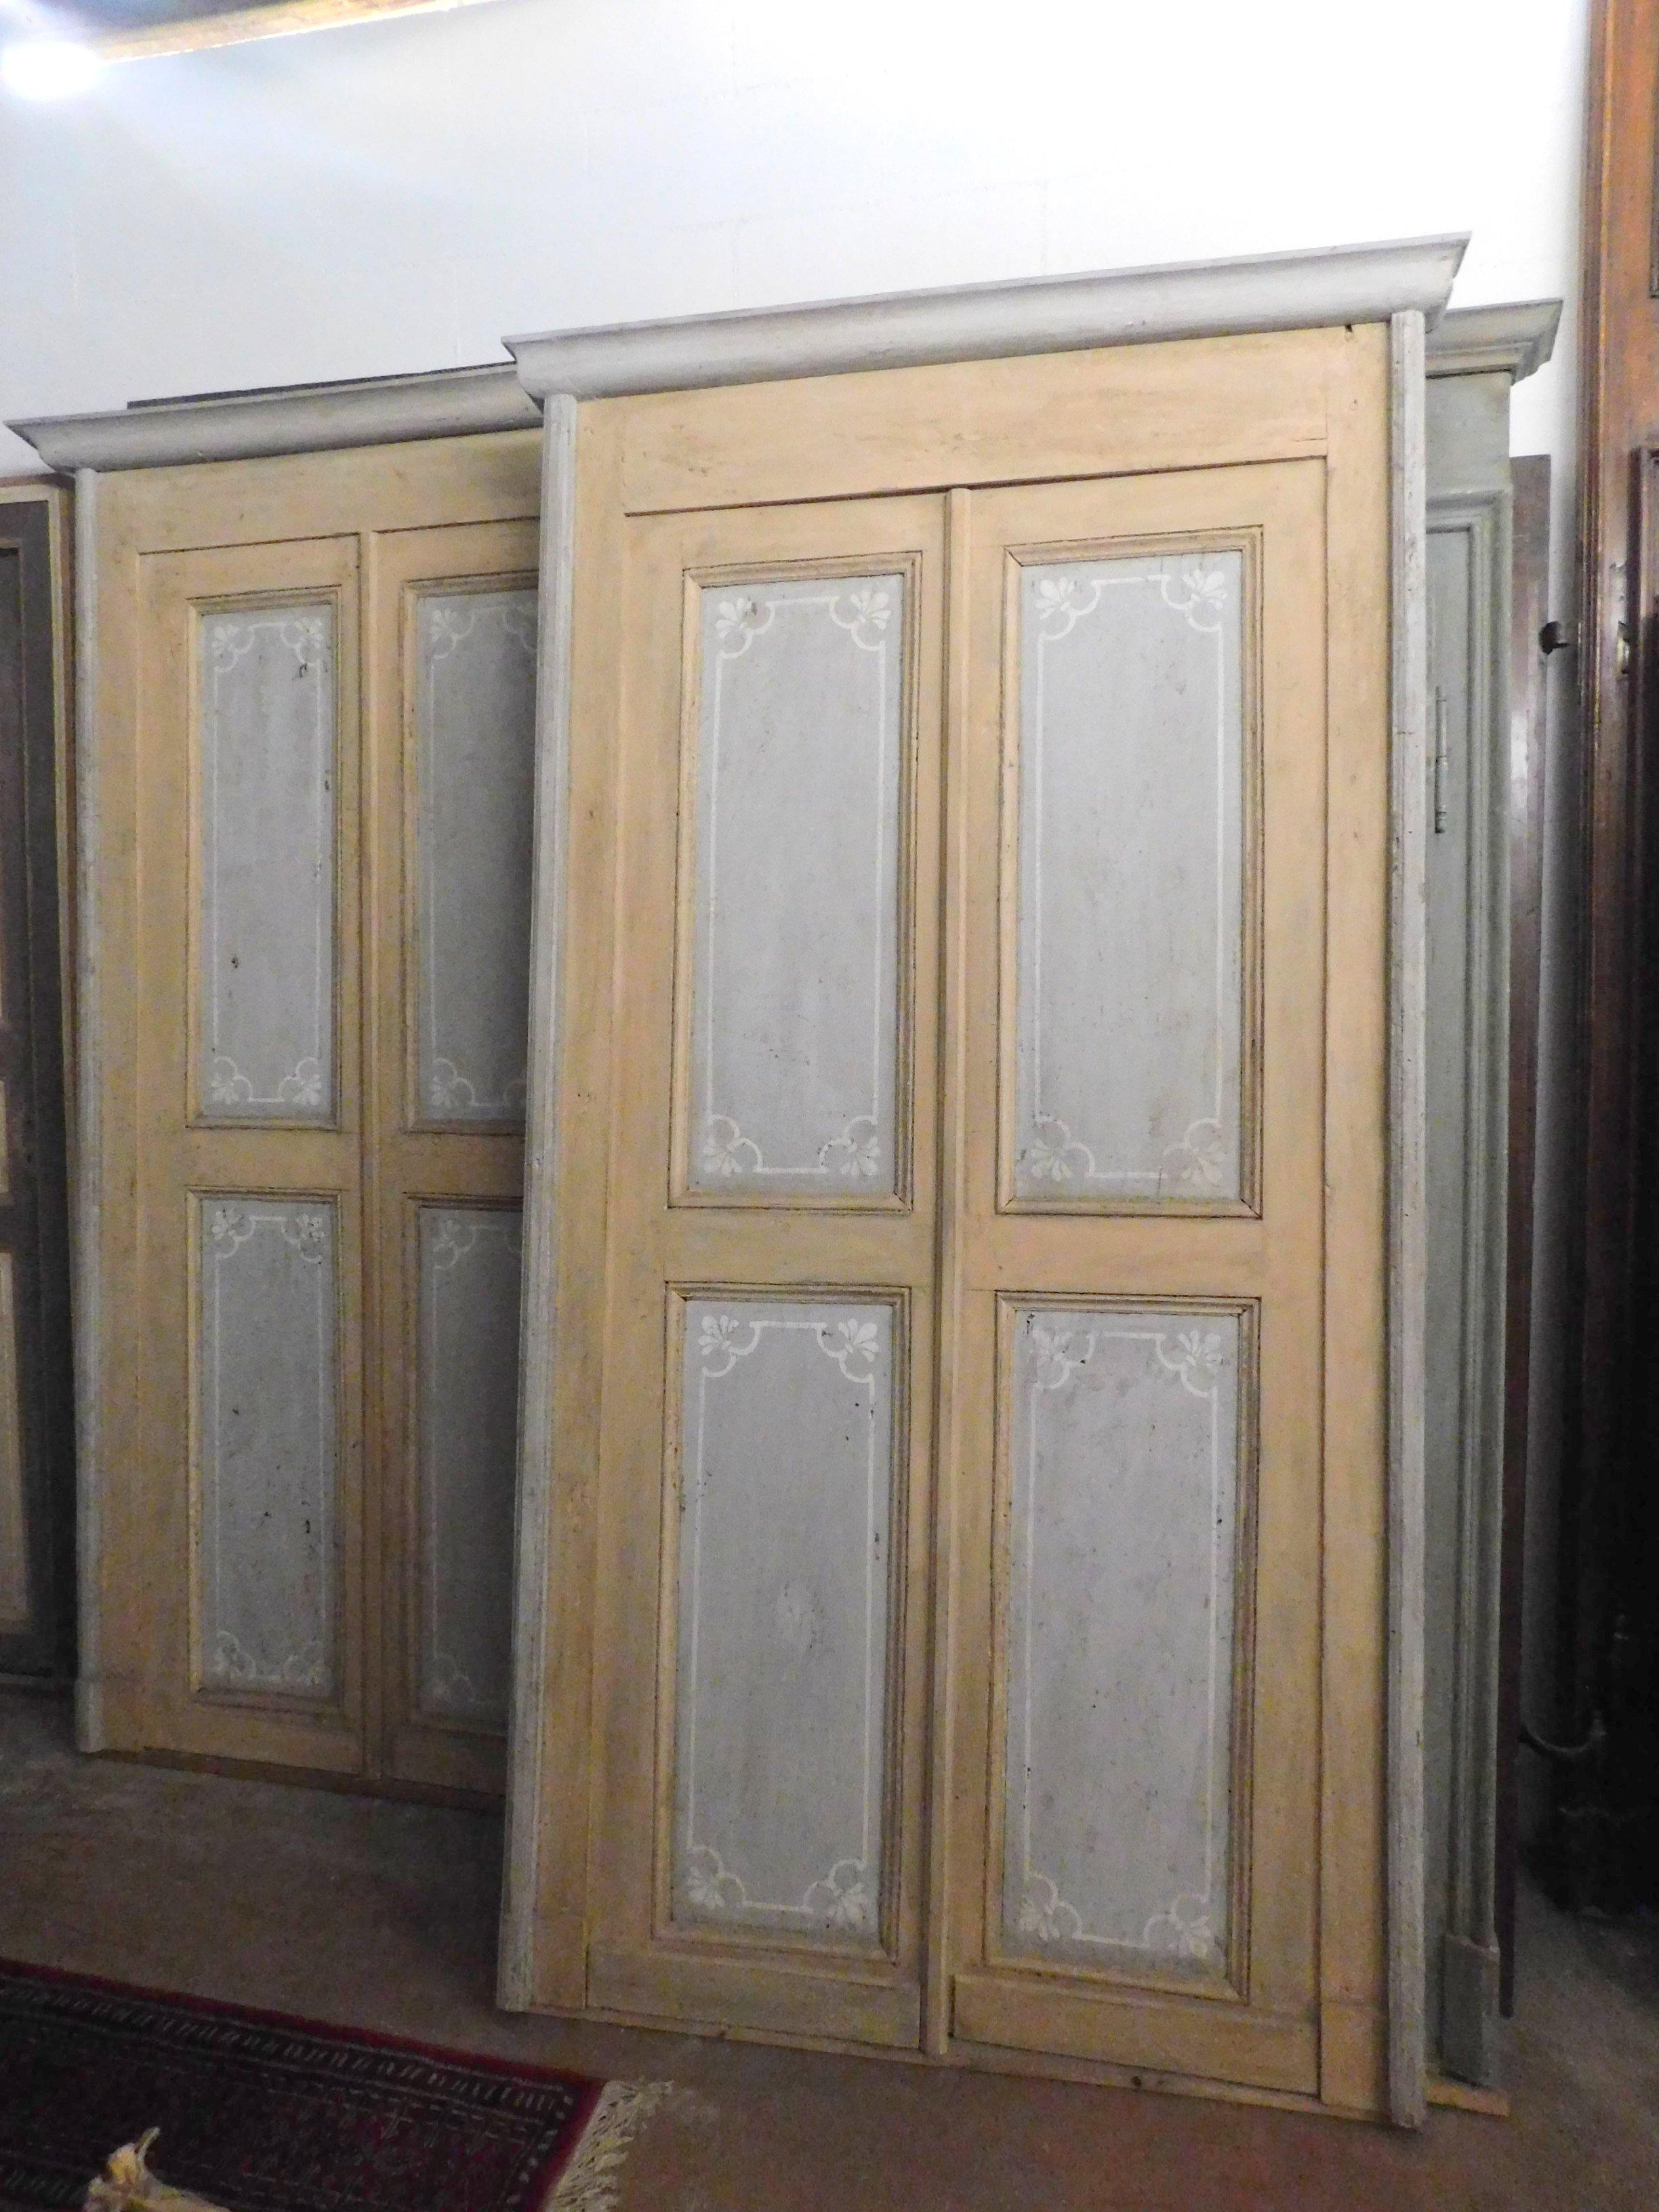 Ancient pair of lacquered doors with original frame, hand lacquered with gray panel and beige / yellow contours, built at the beginning of the 19th century for home in Italy.
Elegant and refined, panels also on the back, can be positioned in sets